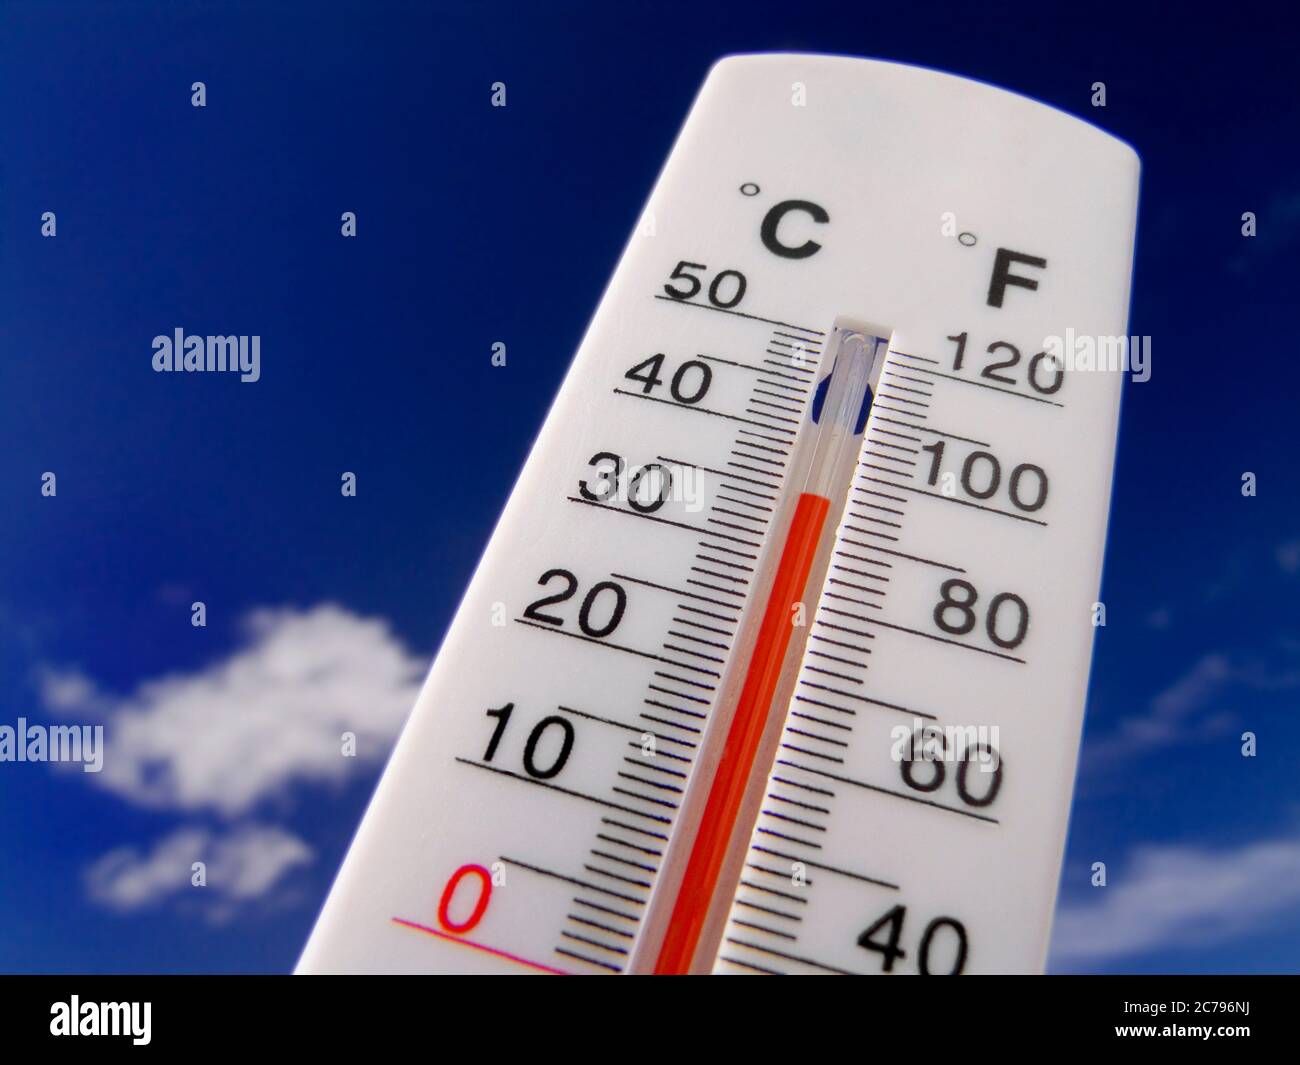 35C TEMPERATURE 93 F HEATWAVE  Temperature gauge rising red Concept Thermometer displays hot & sunny 93F degrees farenheit against a bright blue sky Stock Photo